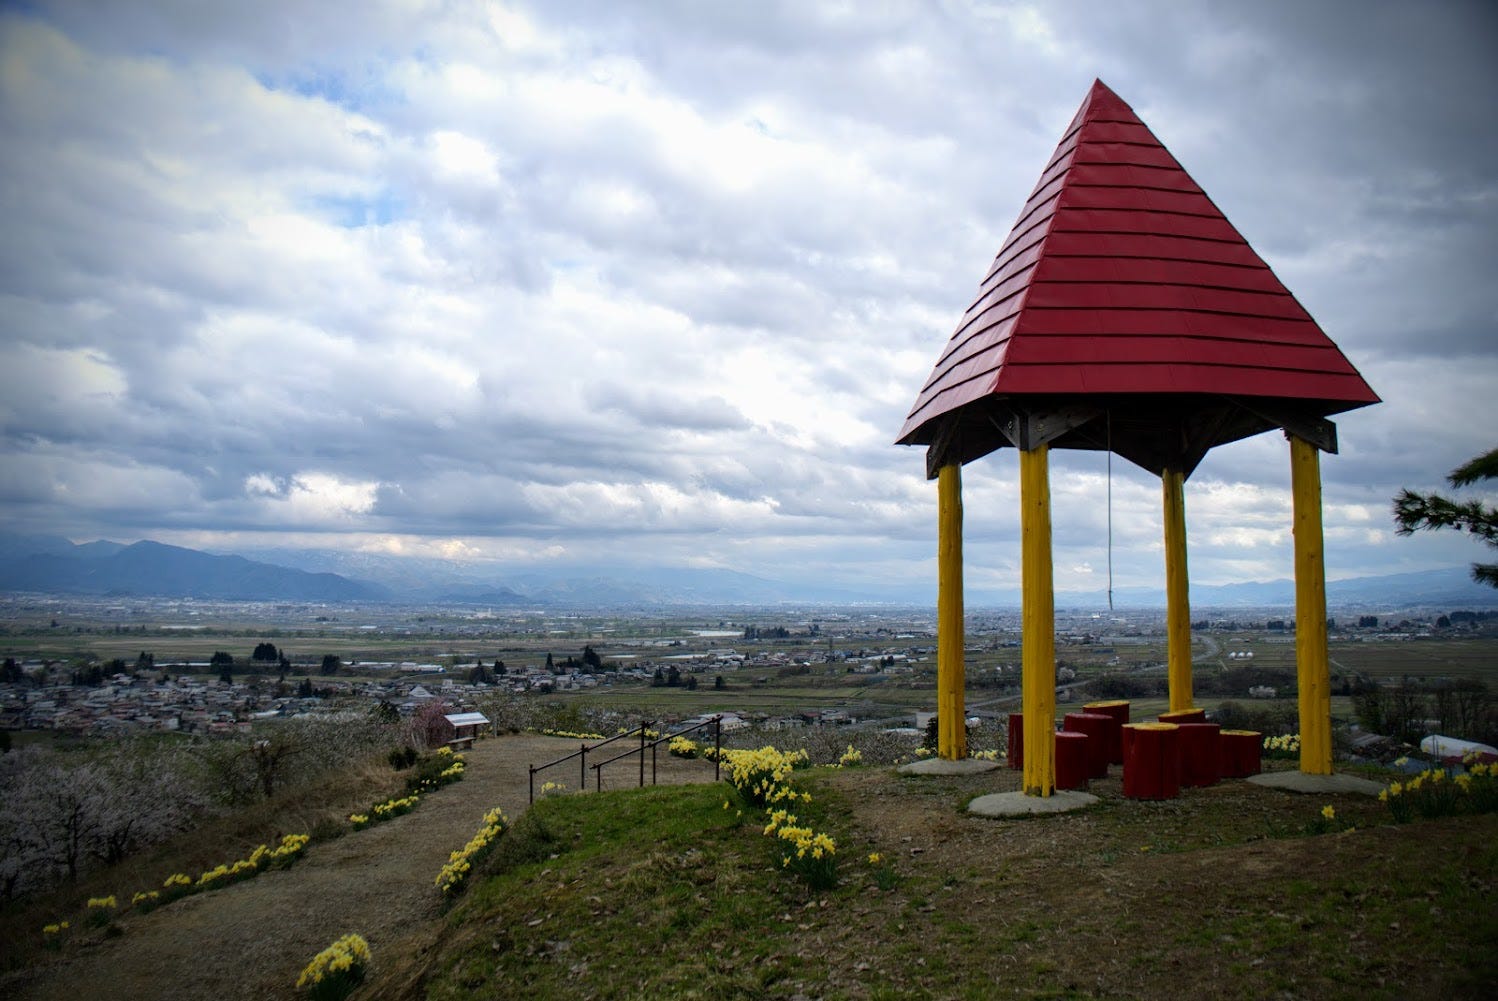 The hut at the summit of Mt. Kitayama with its distinctive red roof, and view of inland Yamagata Prefecture.